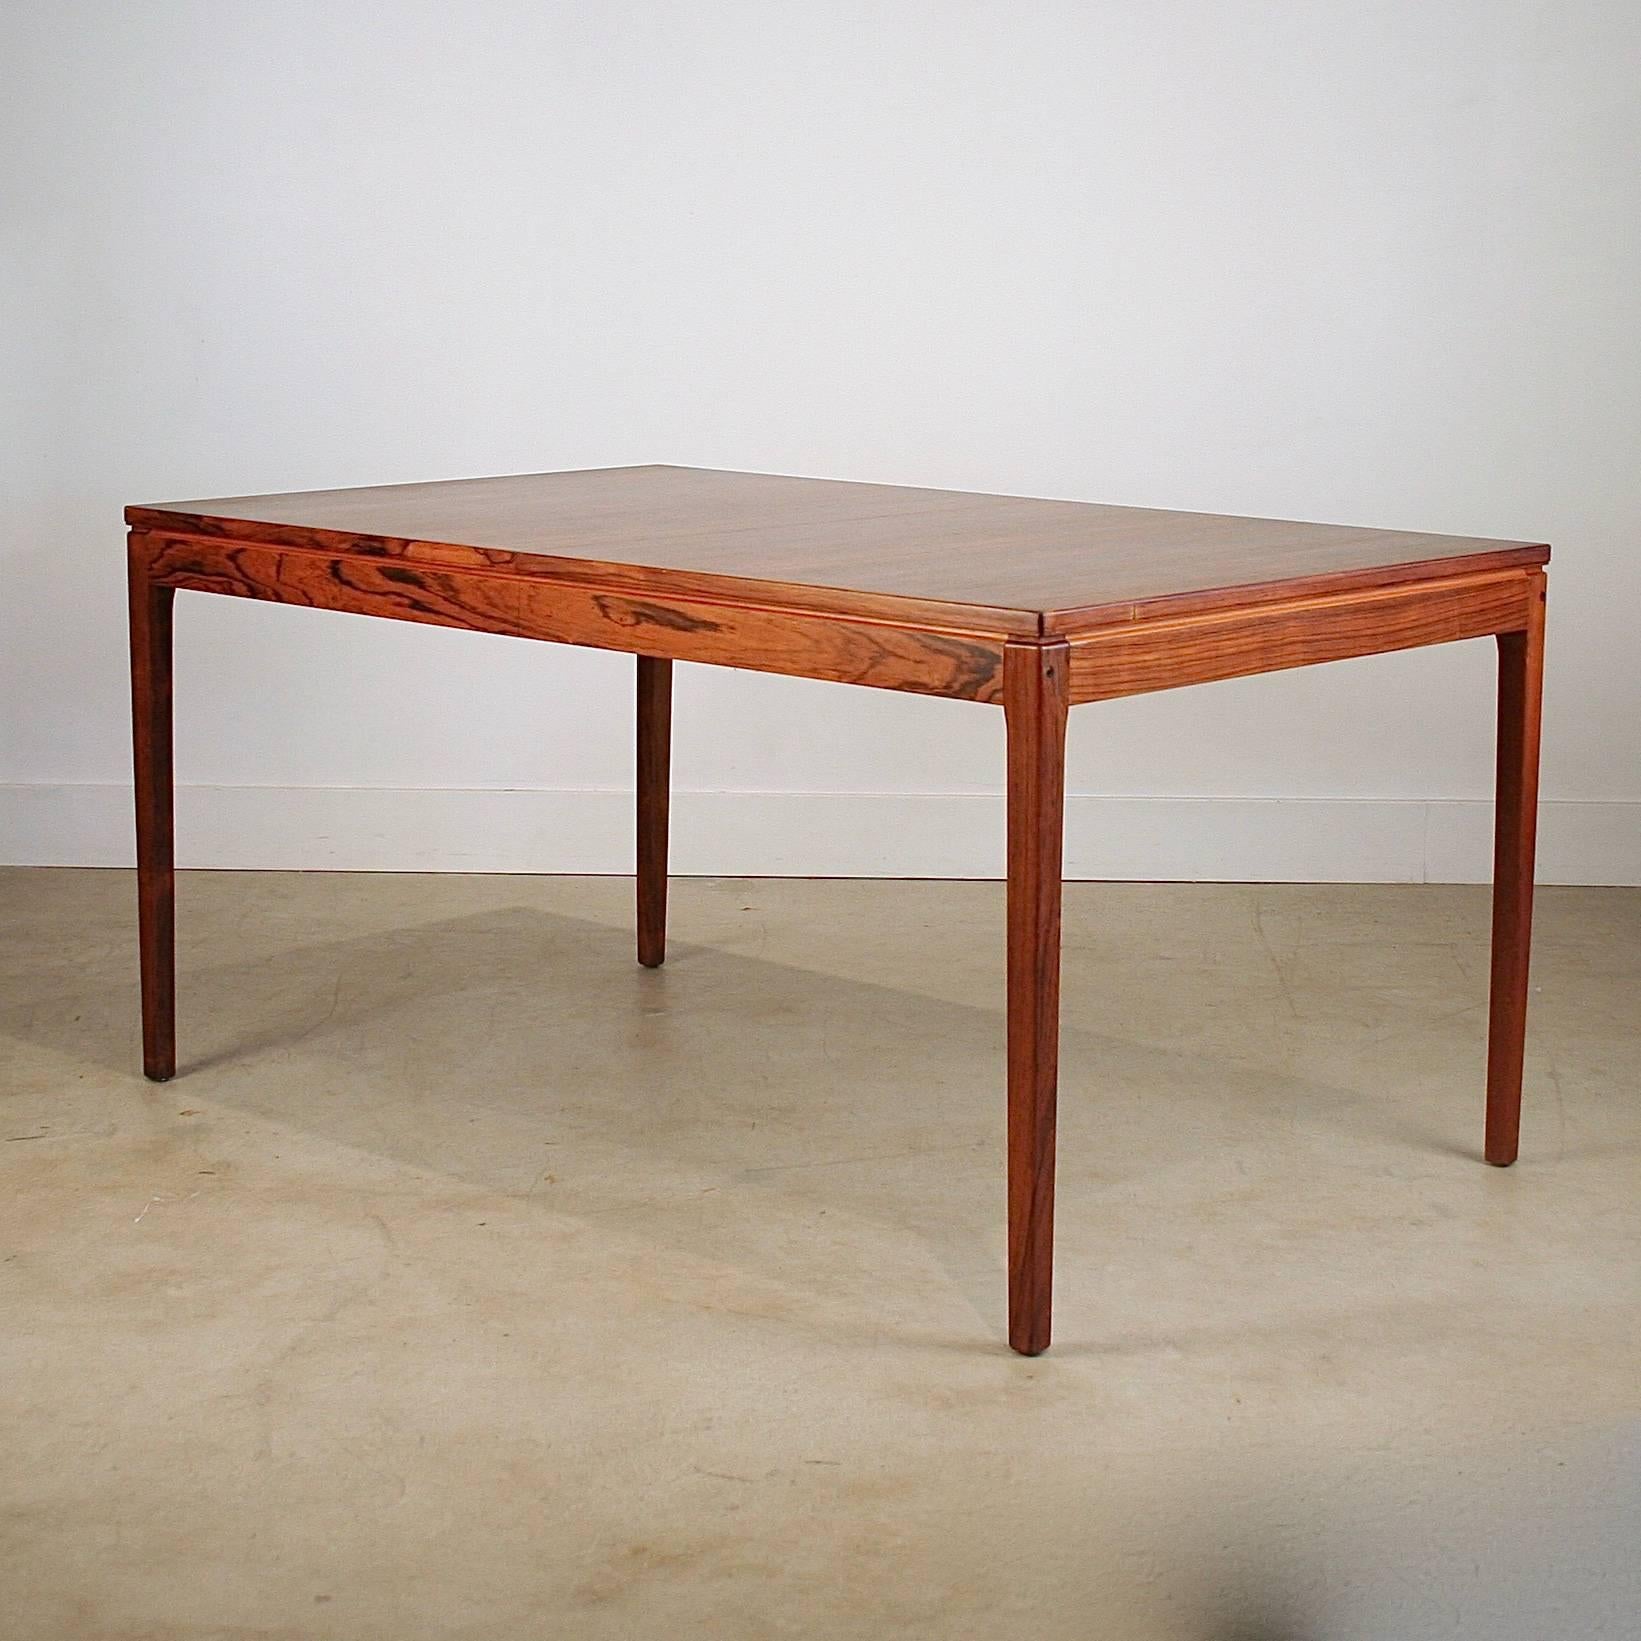 Vintage Danish Rosewood Dining Table In Excellent Condition For Sale In Vancouver, BC